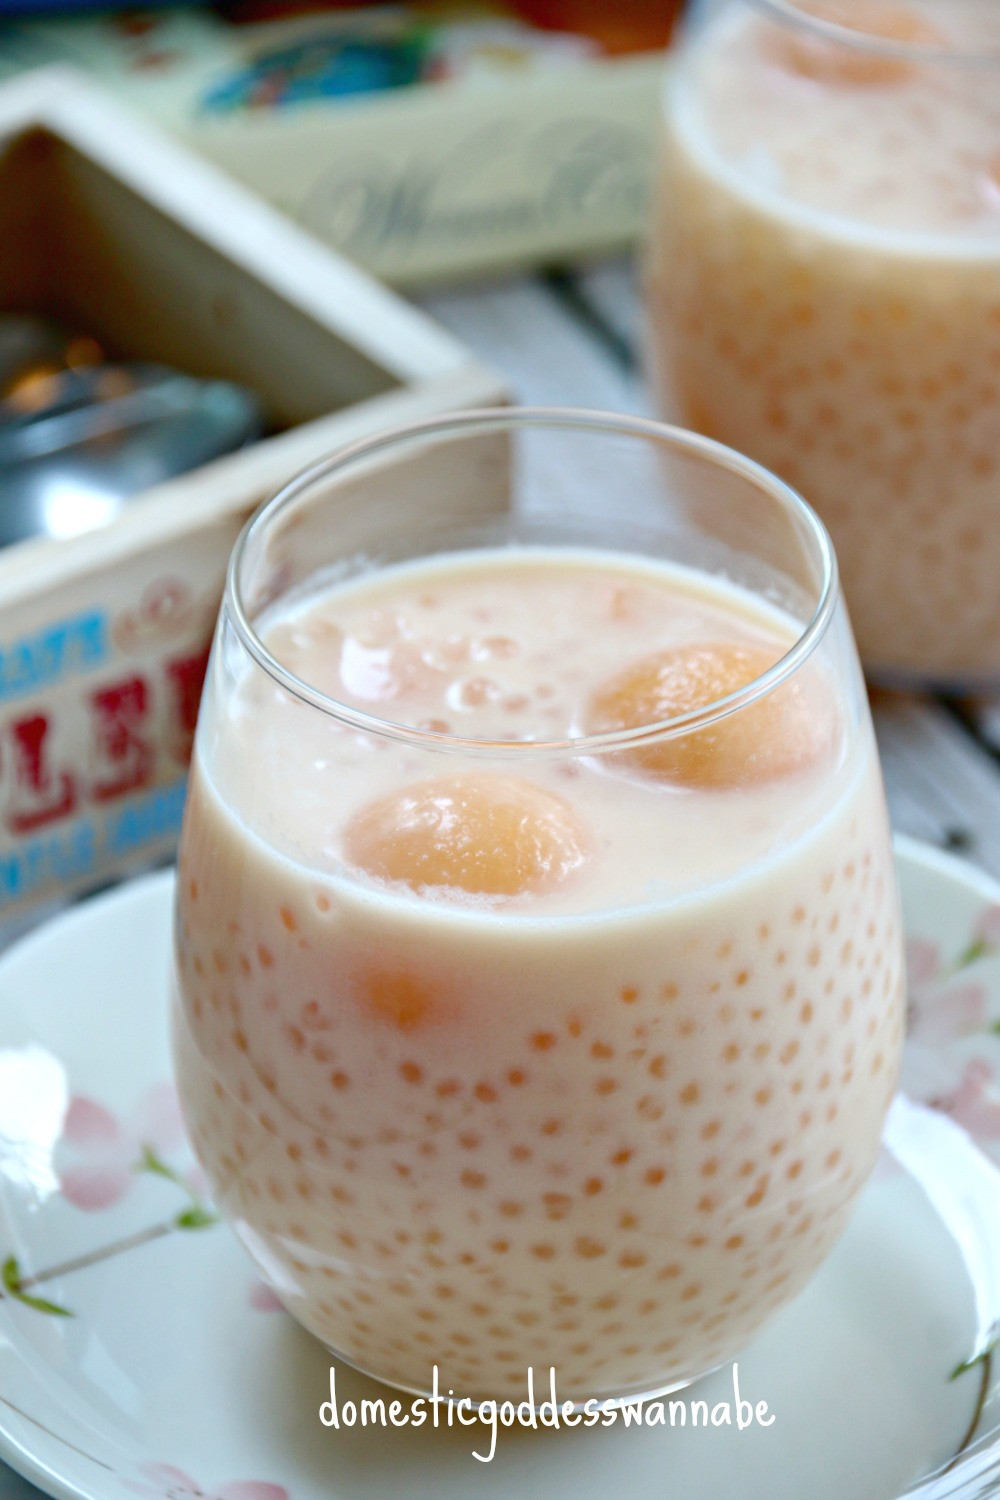 Easy Chinese Dessert Recipes
 coconut milk and rock melon with sago